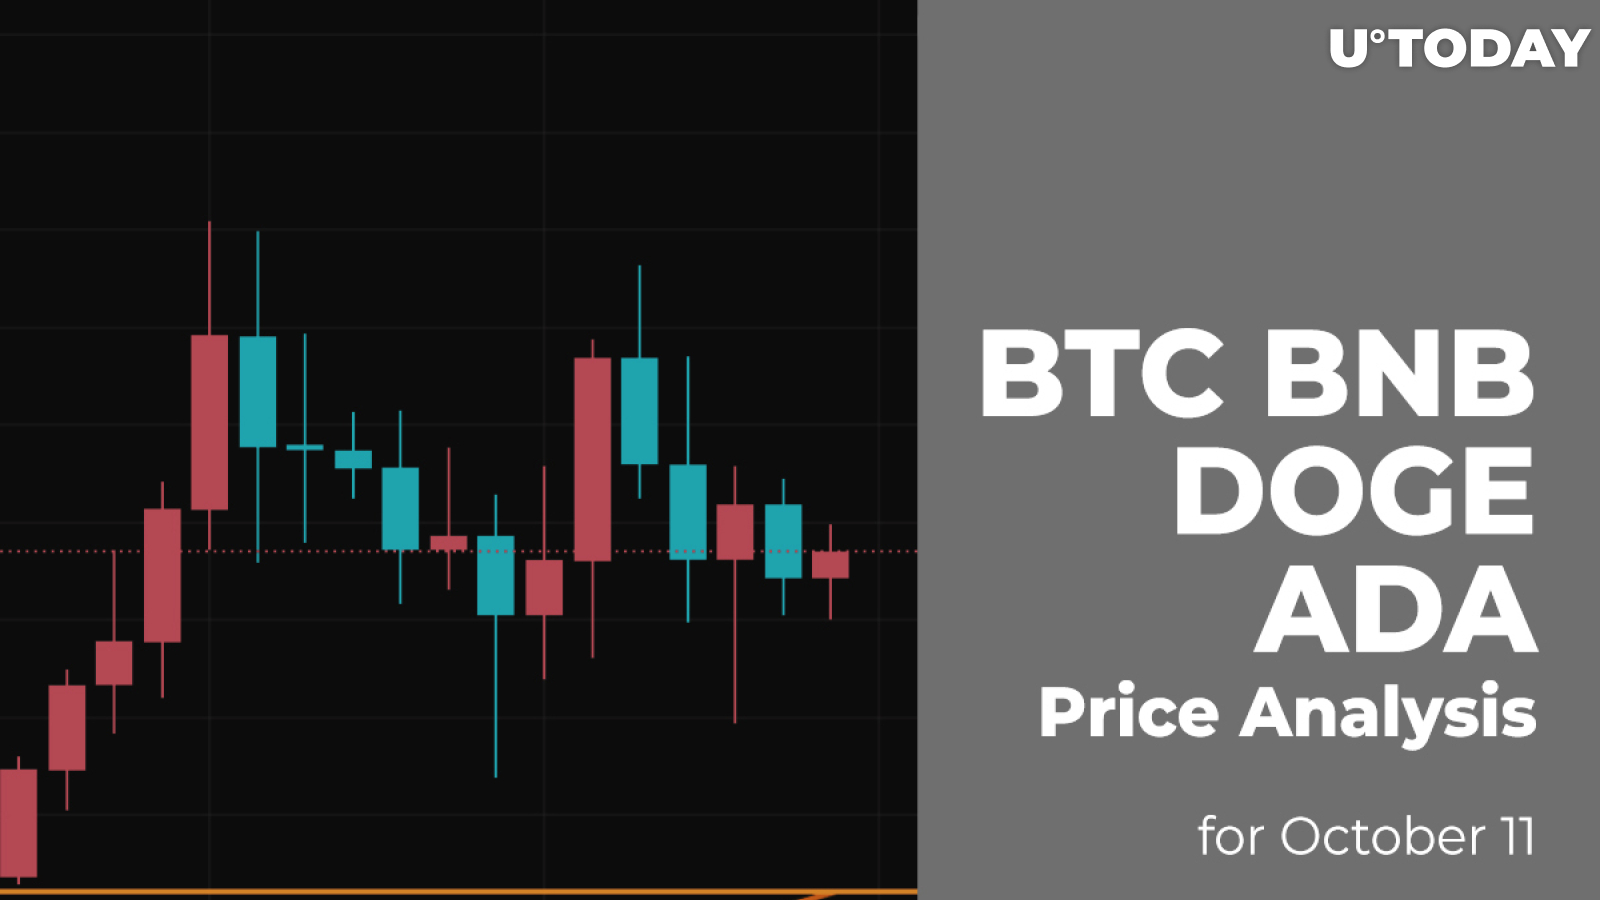 BTC, BNB, DOGE and ADA Price Analysis for October 11